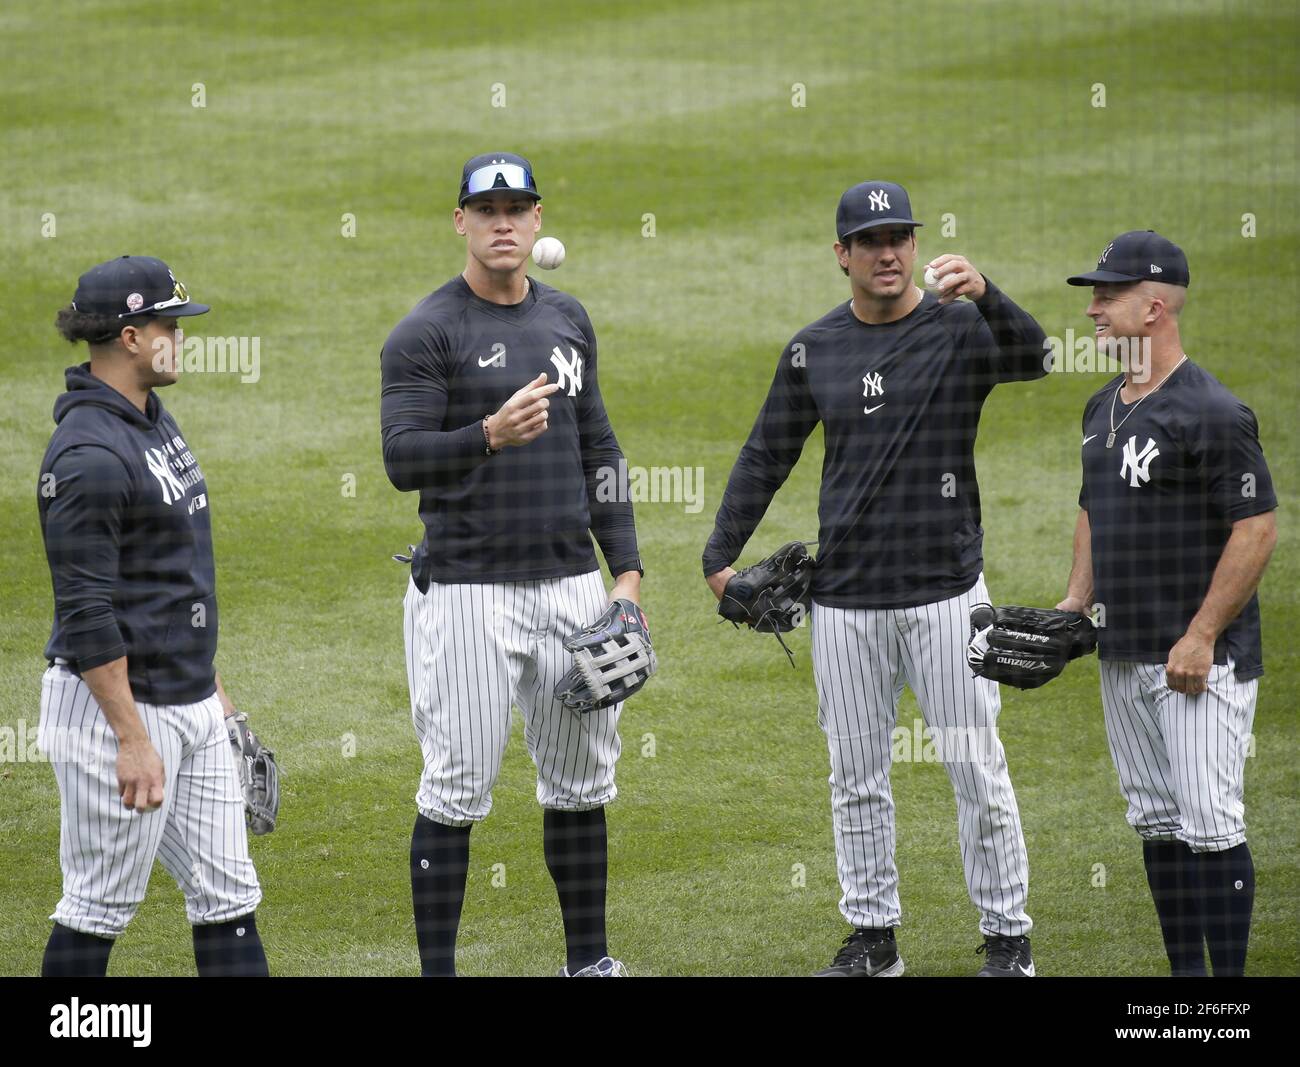 Bronx, United States. 31st Mar, 2021. New York Yankees Giancarlo Stanton, Aaron Judge, Mike Tauchman and Brett Gardner warm up on the field one day before their 2021 MLB Opening Day game against the Toronto Blue Jays at Yankee Stadium on Wednesday March 31, 2021 in New York City. Due to the ongoing coronavirus pandemic, the attendance for the Yankees' Opening Day meeting with the Toronto Blue Jays will be around 10,000 people. Photo by John Angelillo/UPI Credit: UPI/Alamy Live News Stock Photo